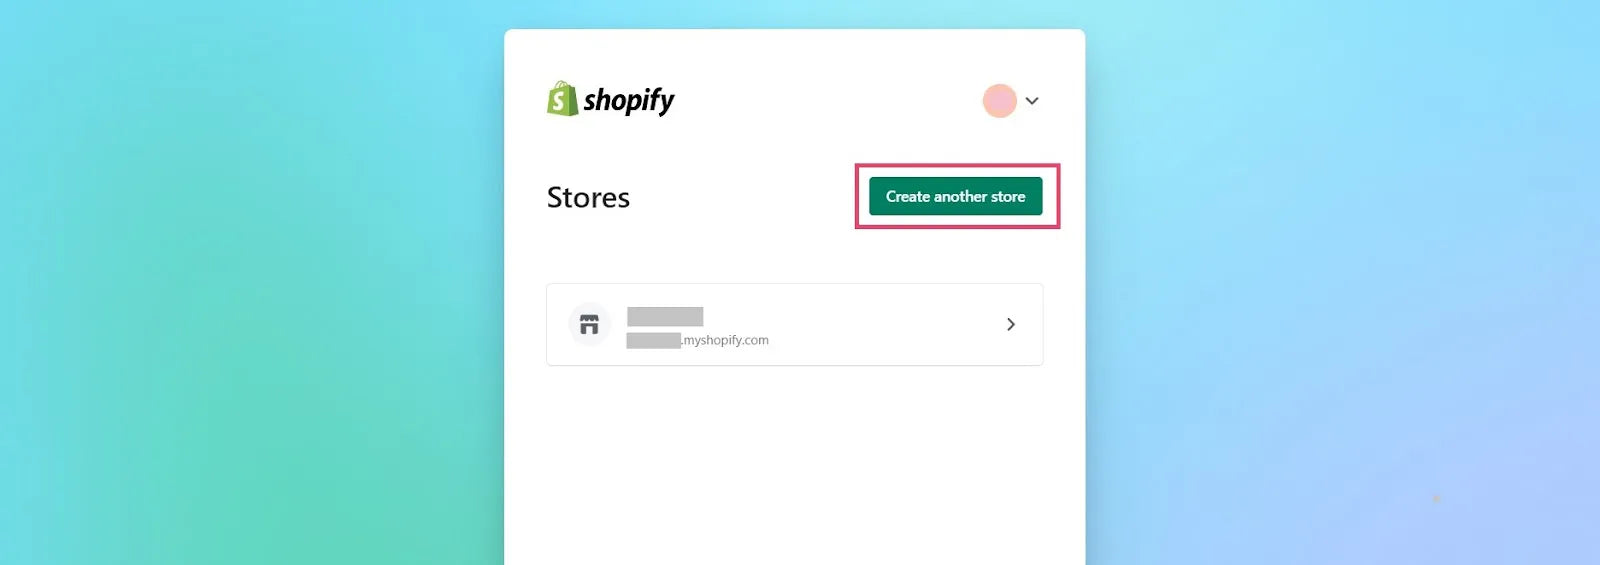 Shopify Stores’ tab to create another store